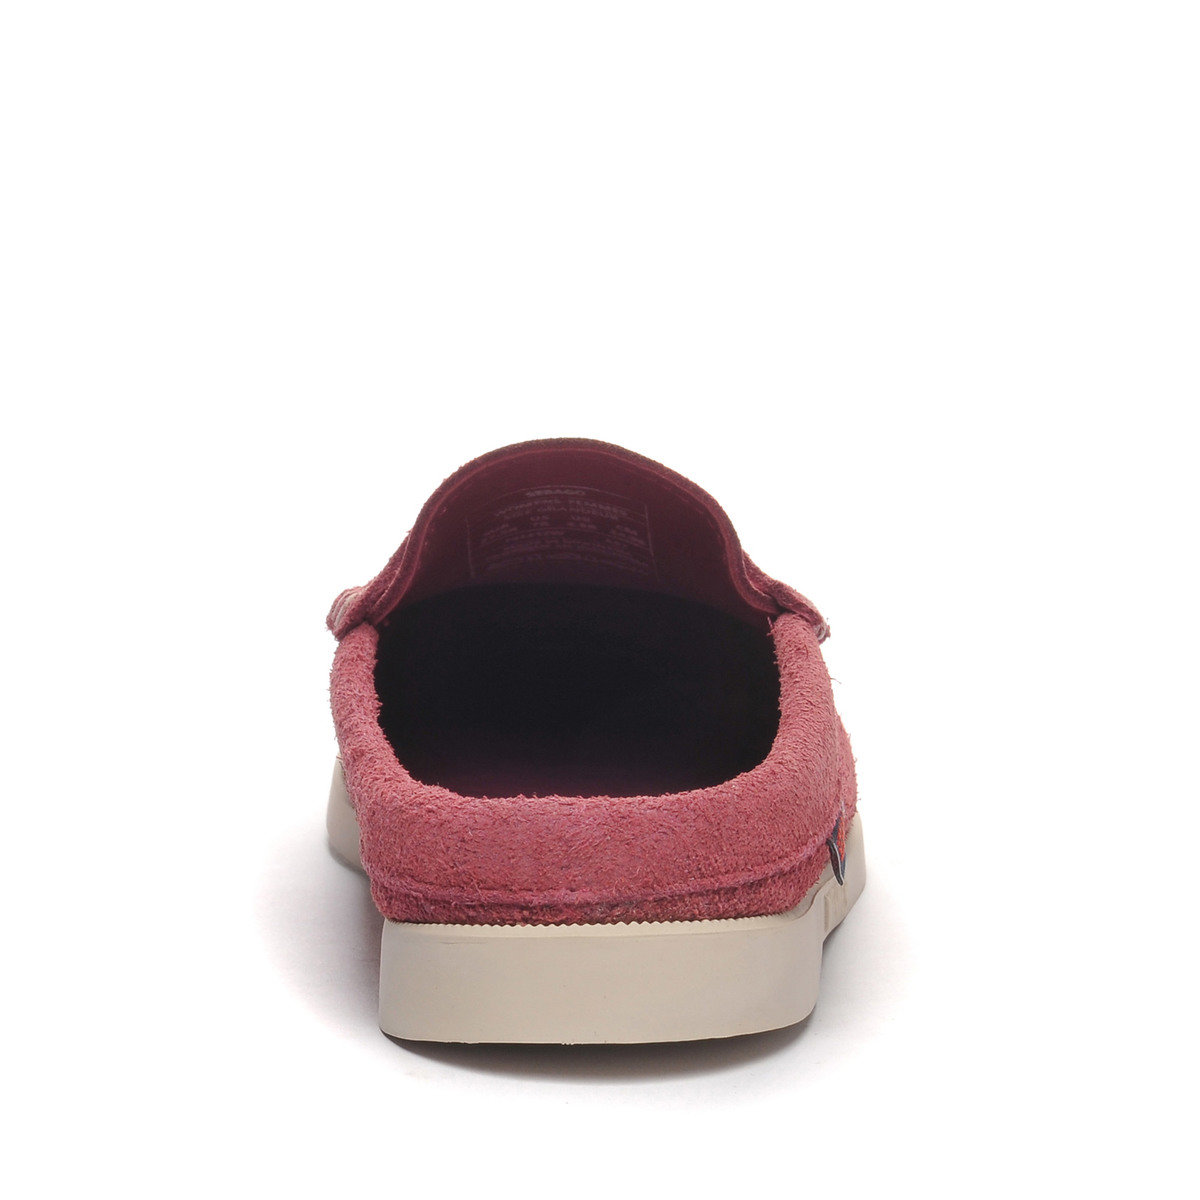 Omega Woman Suede Loafer Mules